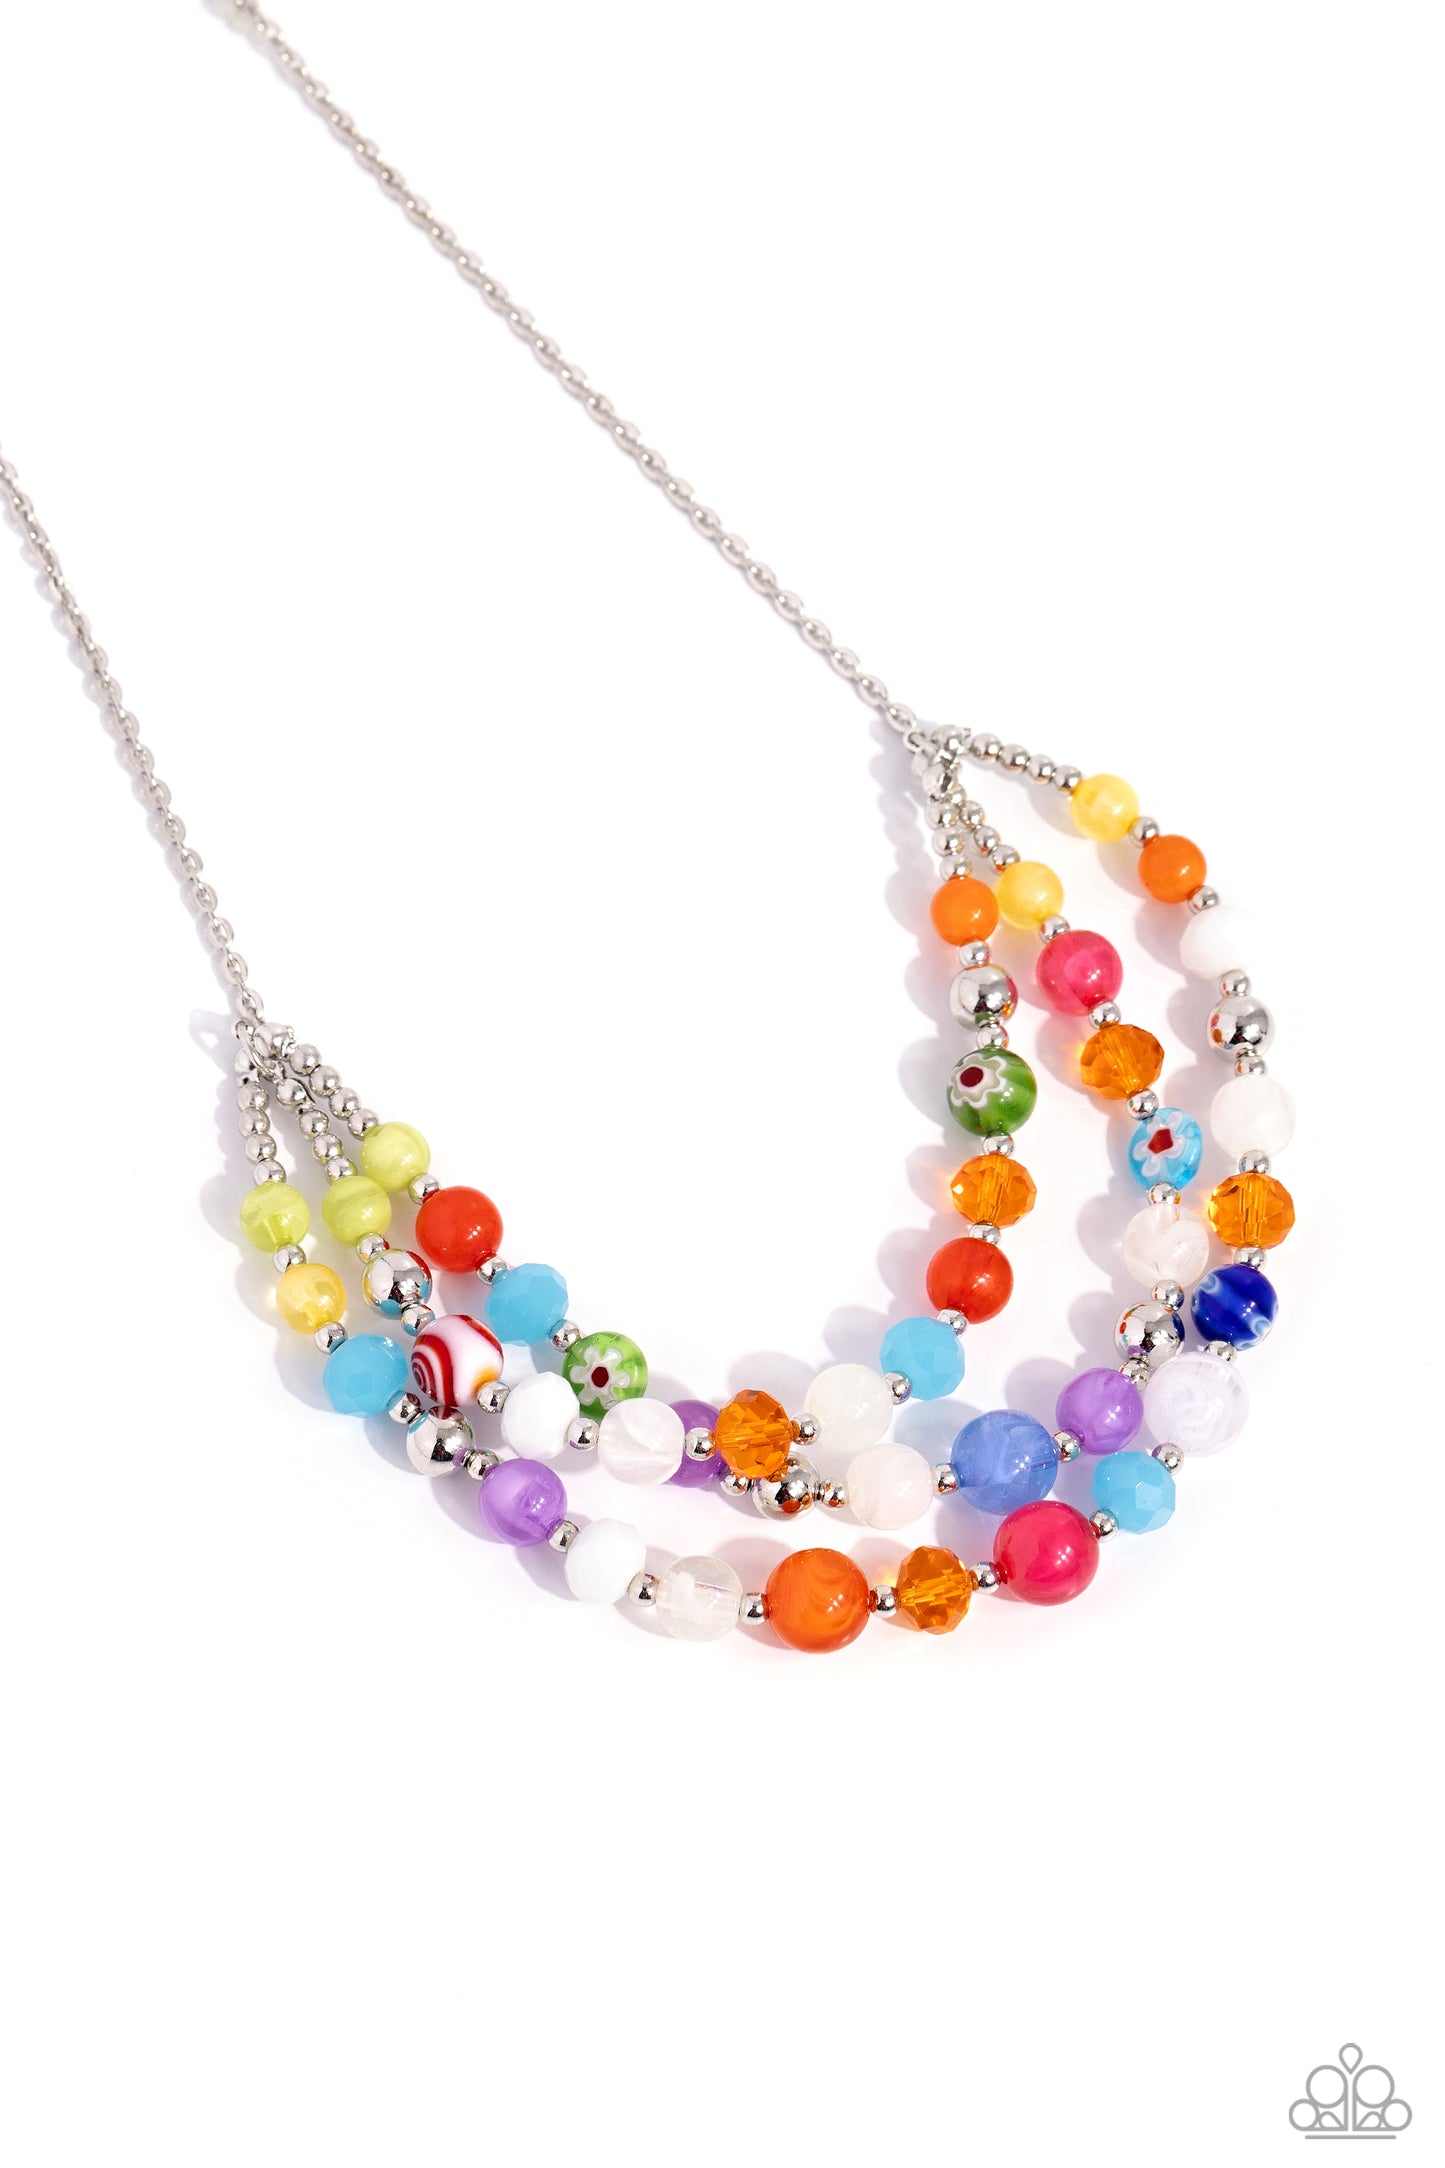 <p data-mce-fragment="1">Paparazzi Accessories - Summer Scope - Multi Necklaces sttached and separated by shiny silver beads, three rows of alternating vibrant multicolored beads, silver studs, and floral-inspired beads layer across the collar, creating a colorful canvas. Features an adjustable clasp closure.</p> <p data-mce-fragment="1"><i data-mce-fragment="1">Sold as one individual necklace. Includes one pair of matching earrings.</i></p>